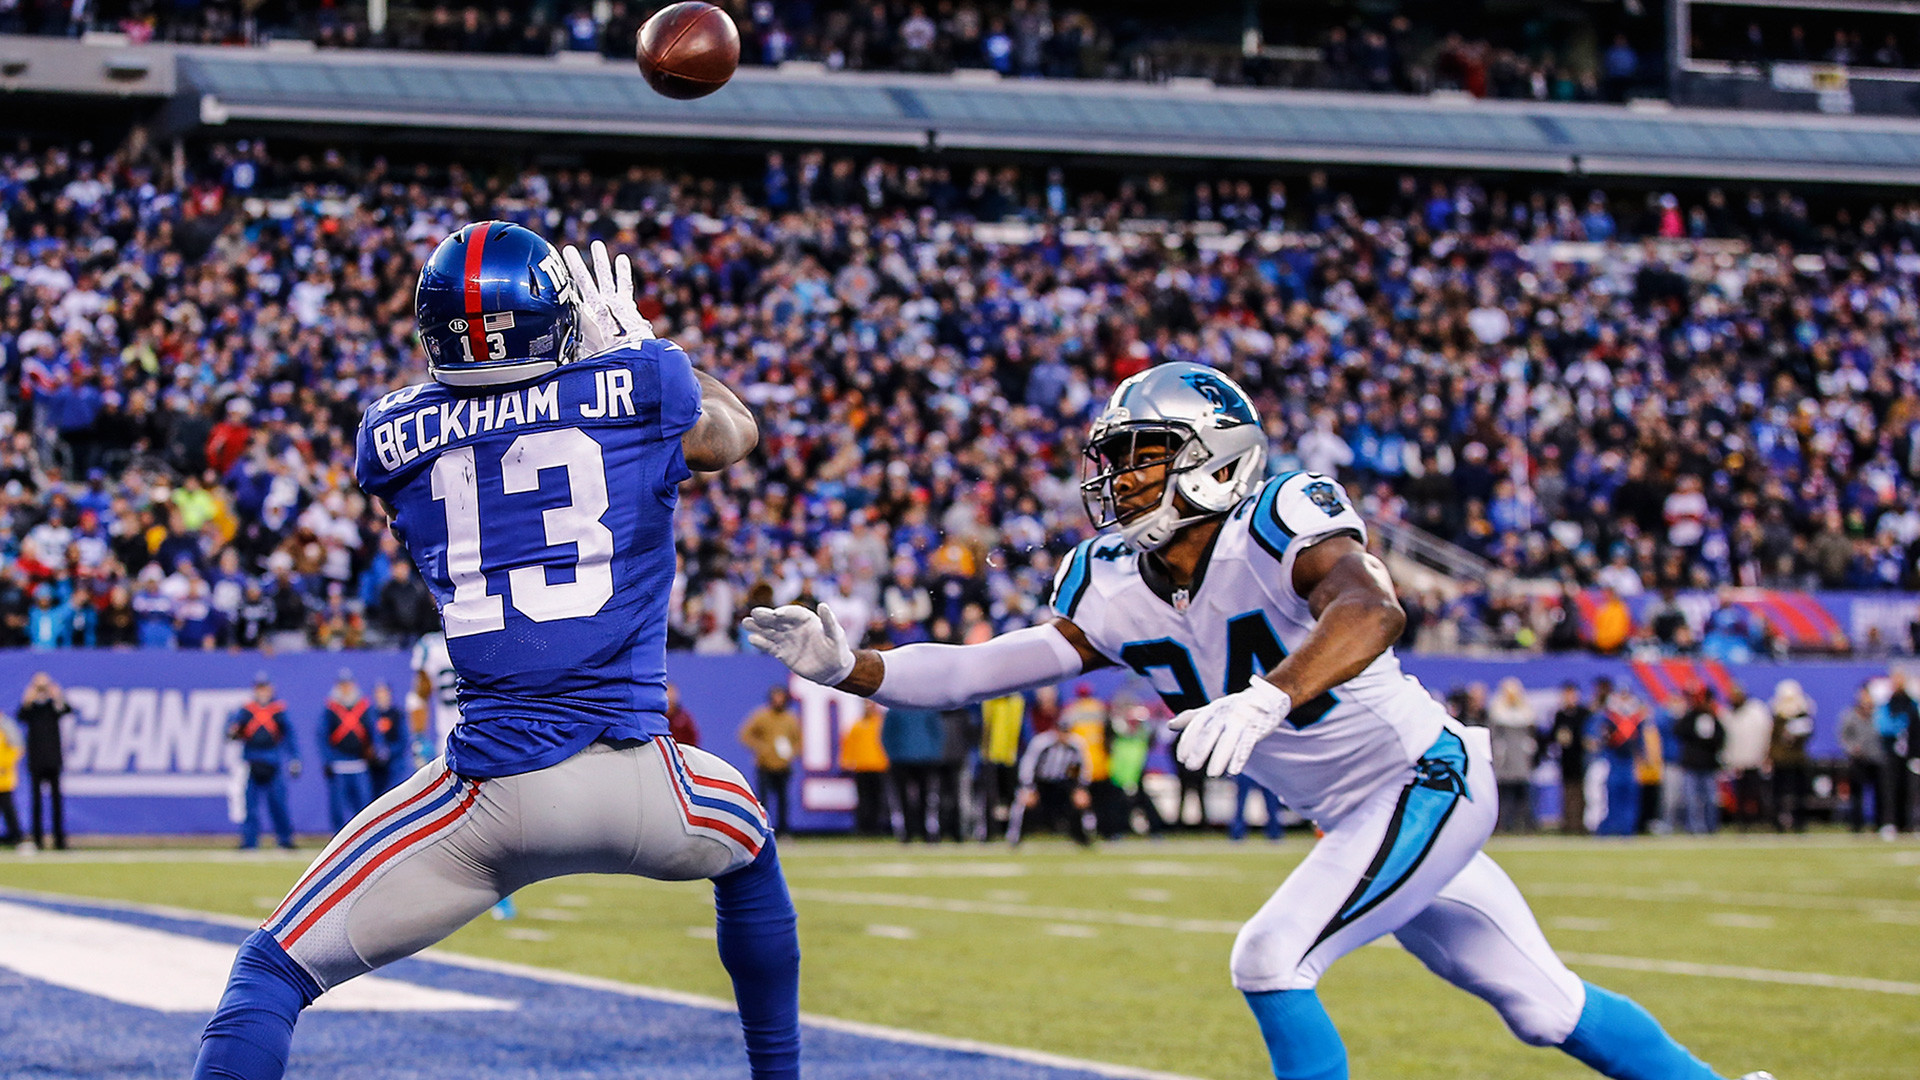 1920x1080 NFL pundits blast Odell Beckham Jr. for losing control in Giants loss